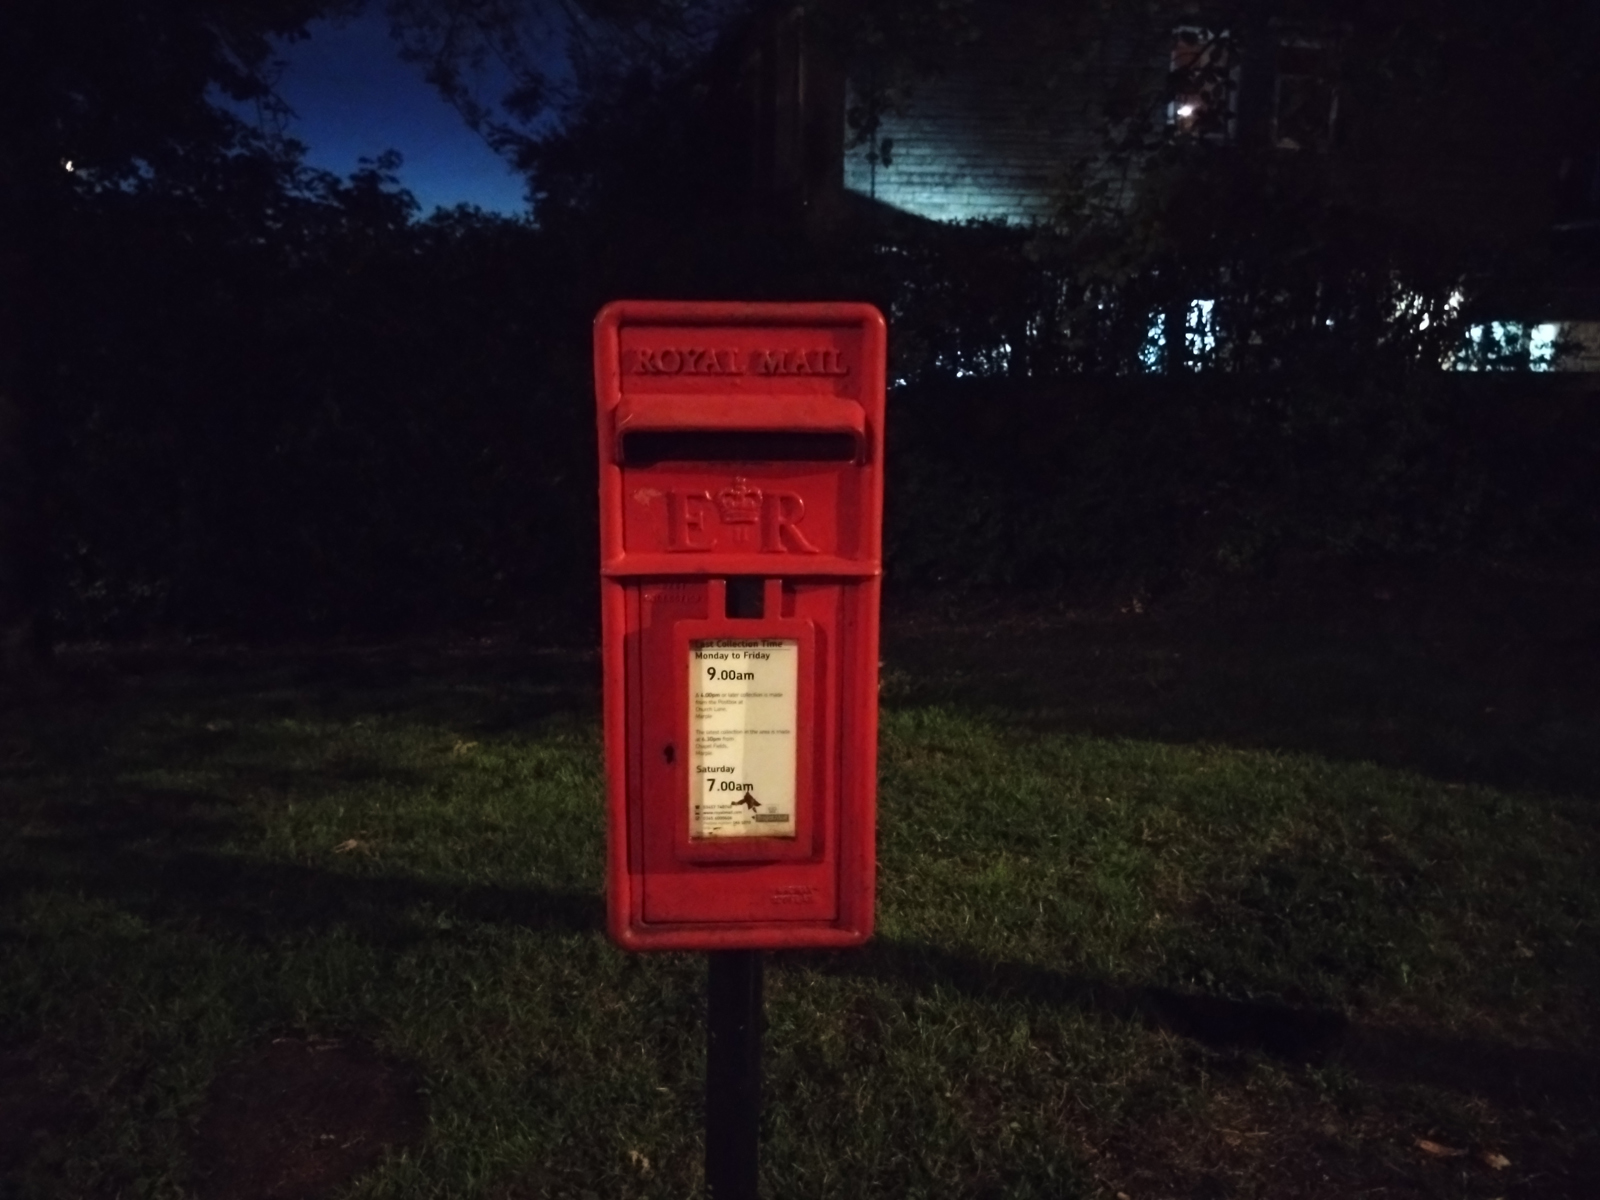 Sony Xperia 10 IV camera sample showing a post box in the dark